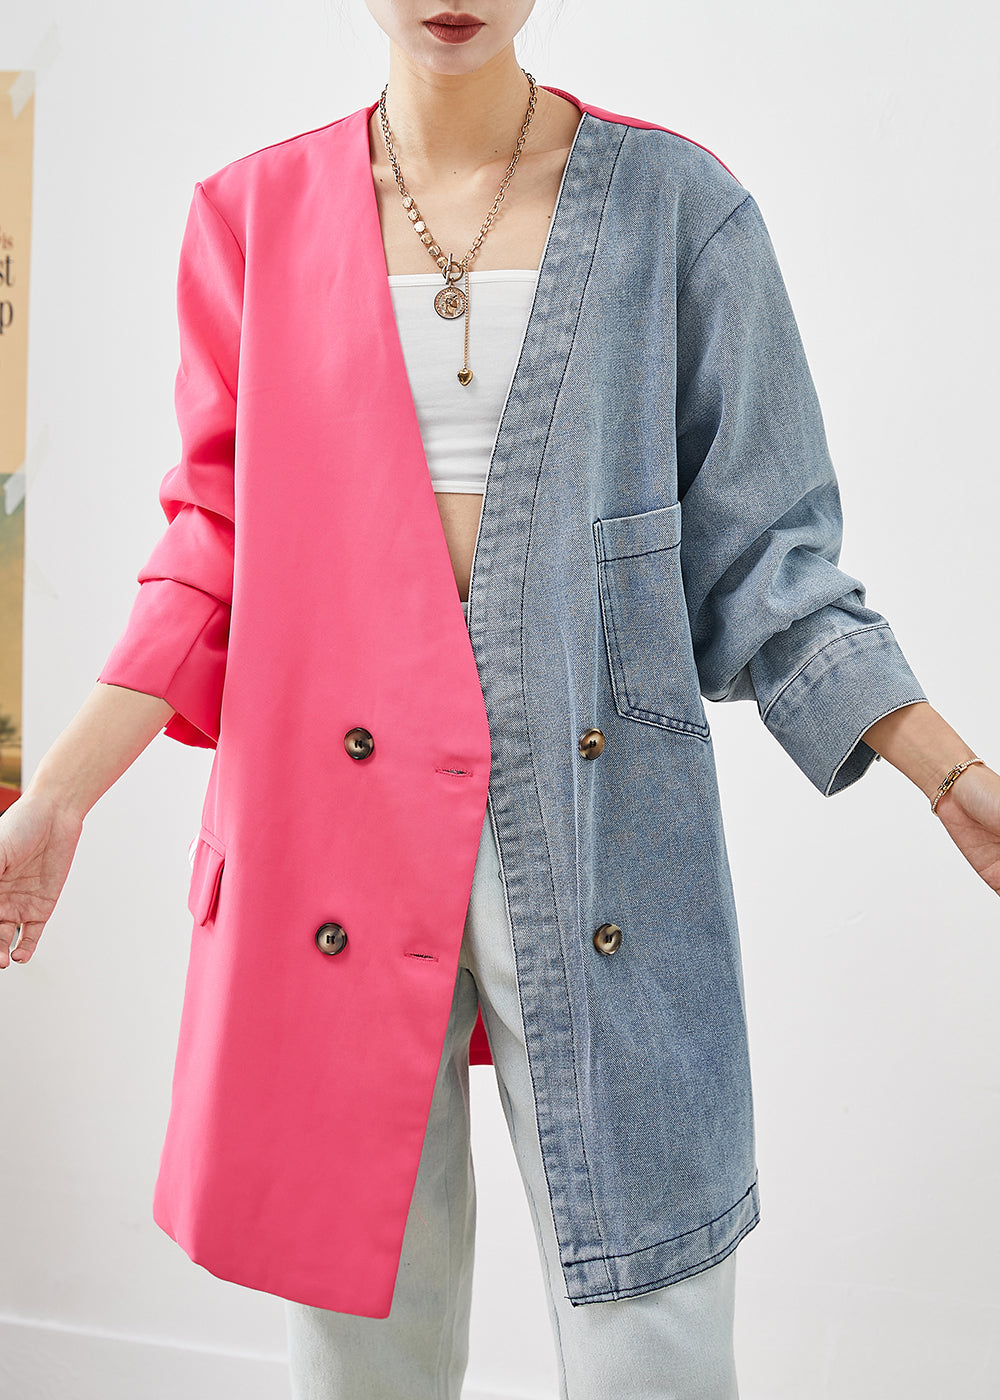 Chic Colorblock Asymmetrical Patchwork Double Breast Cotton Coats Fall